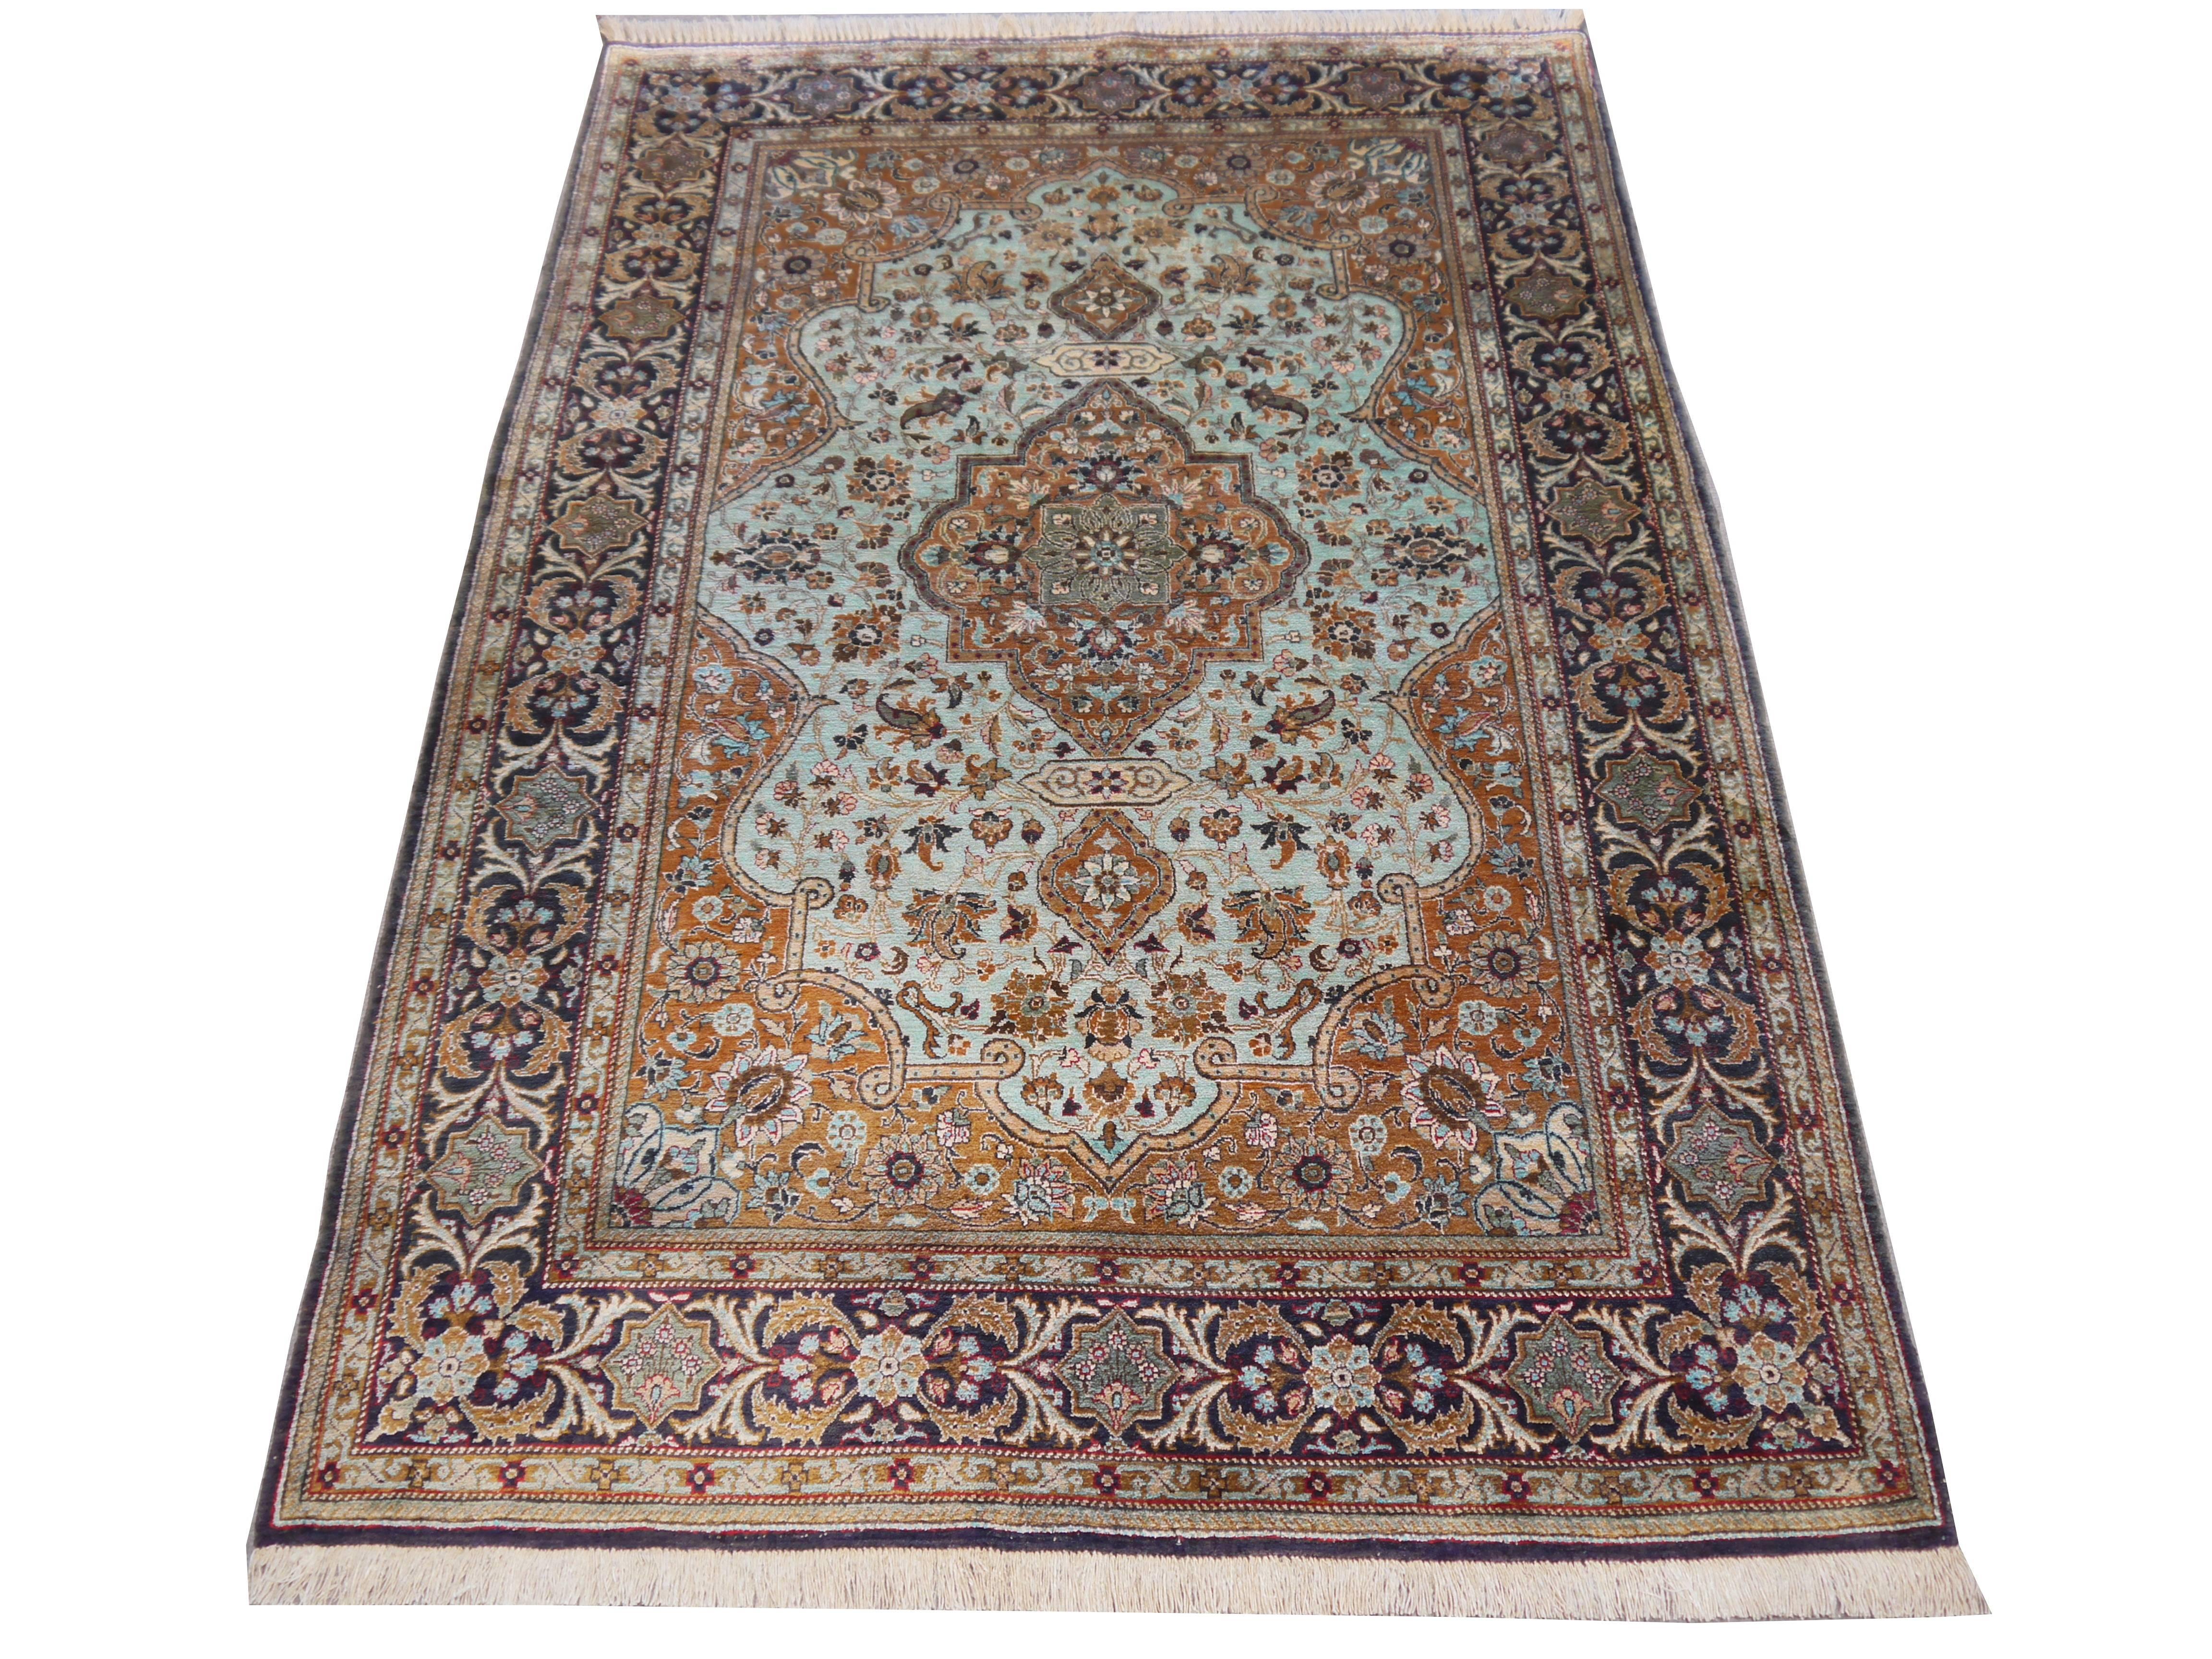 Qum is a city in central persia. It is world famous for it´s one of a kind pure silk rugs. This piece was made mid-20th century and decorated a wall since then. It is in 